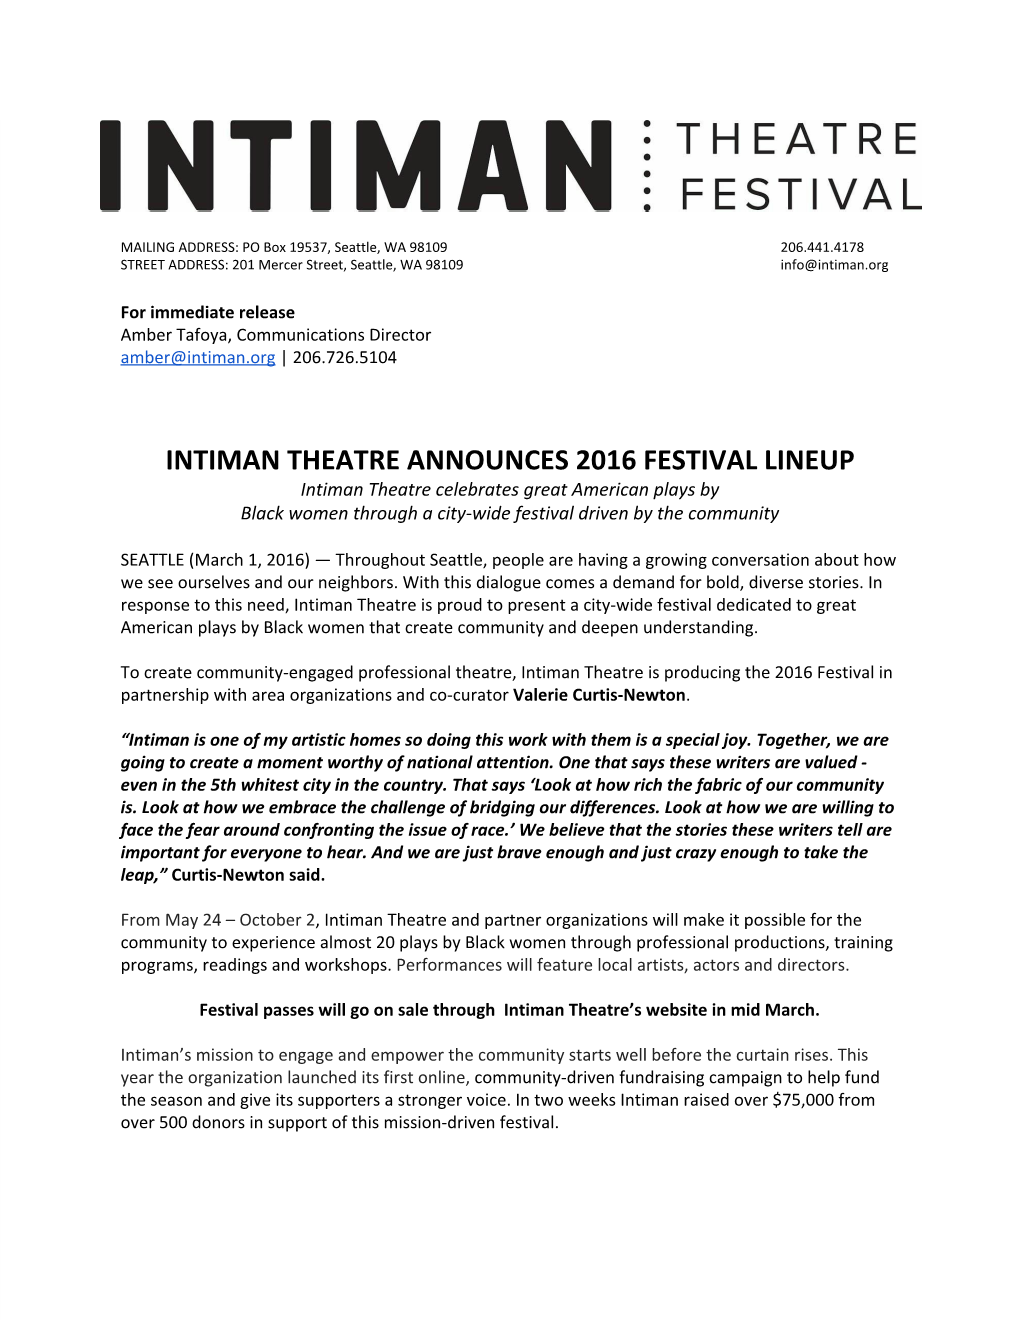 INTIMAN THEATRE ANNOUNCES 2016 FESTIVAL LINEUP Intiman Theatre Celebrates Great American Plays by Black Women Through a City‐Wide Festival Driven by the Community